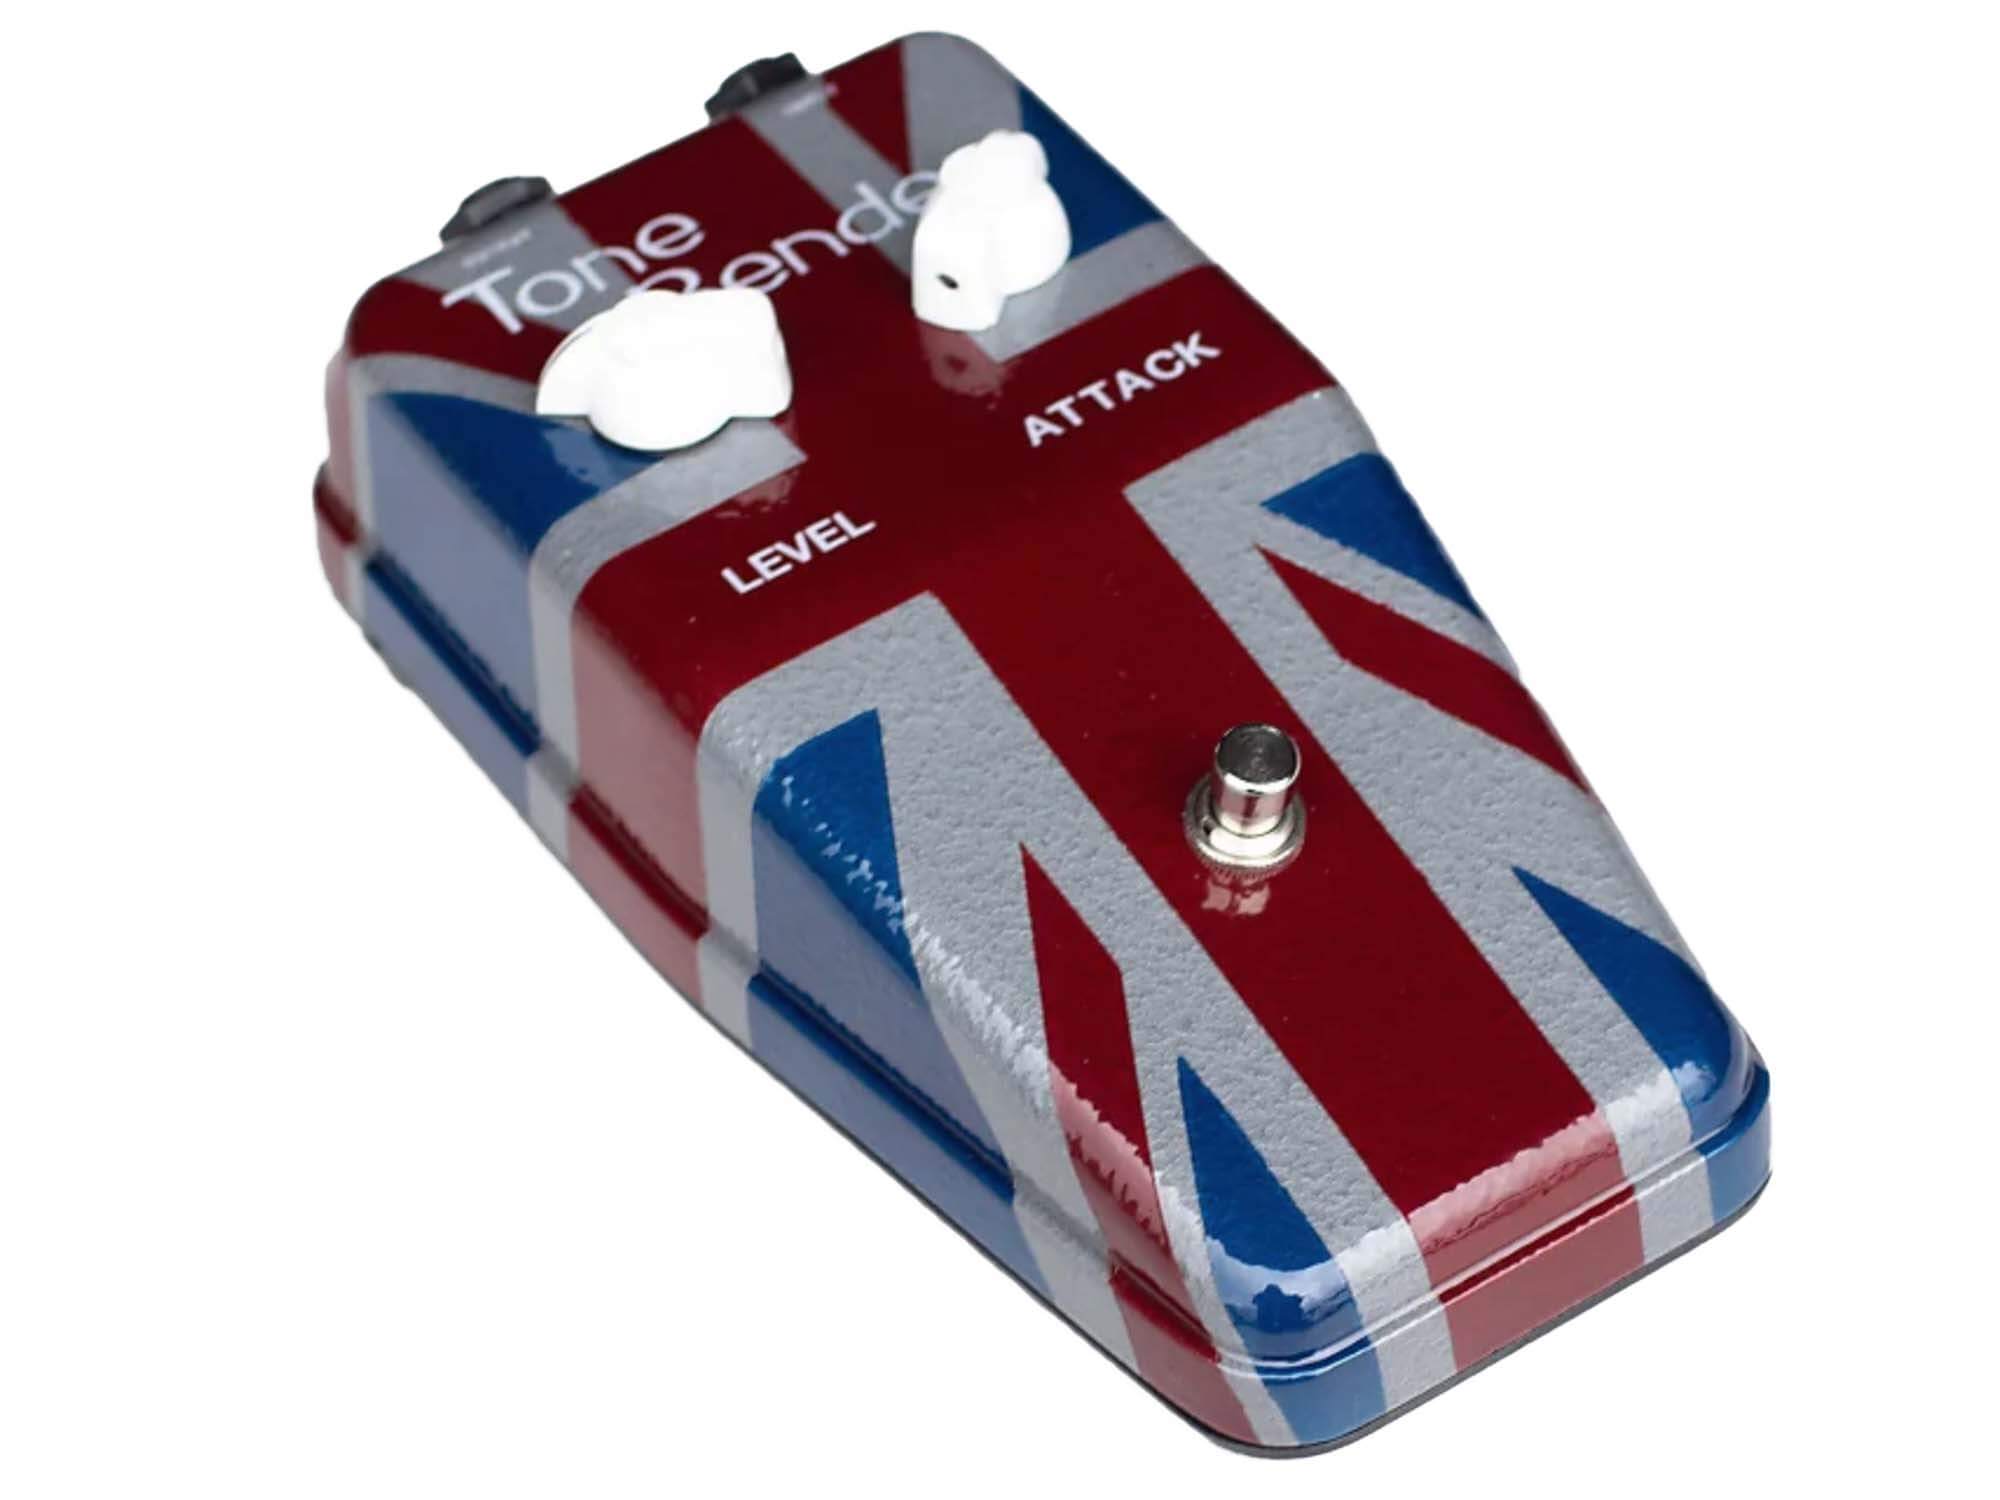 king-of-fuzz-british-pedal-co@2000x1500